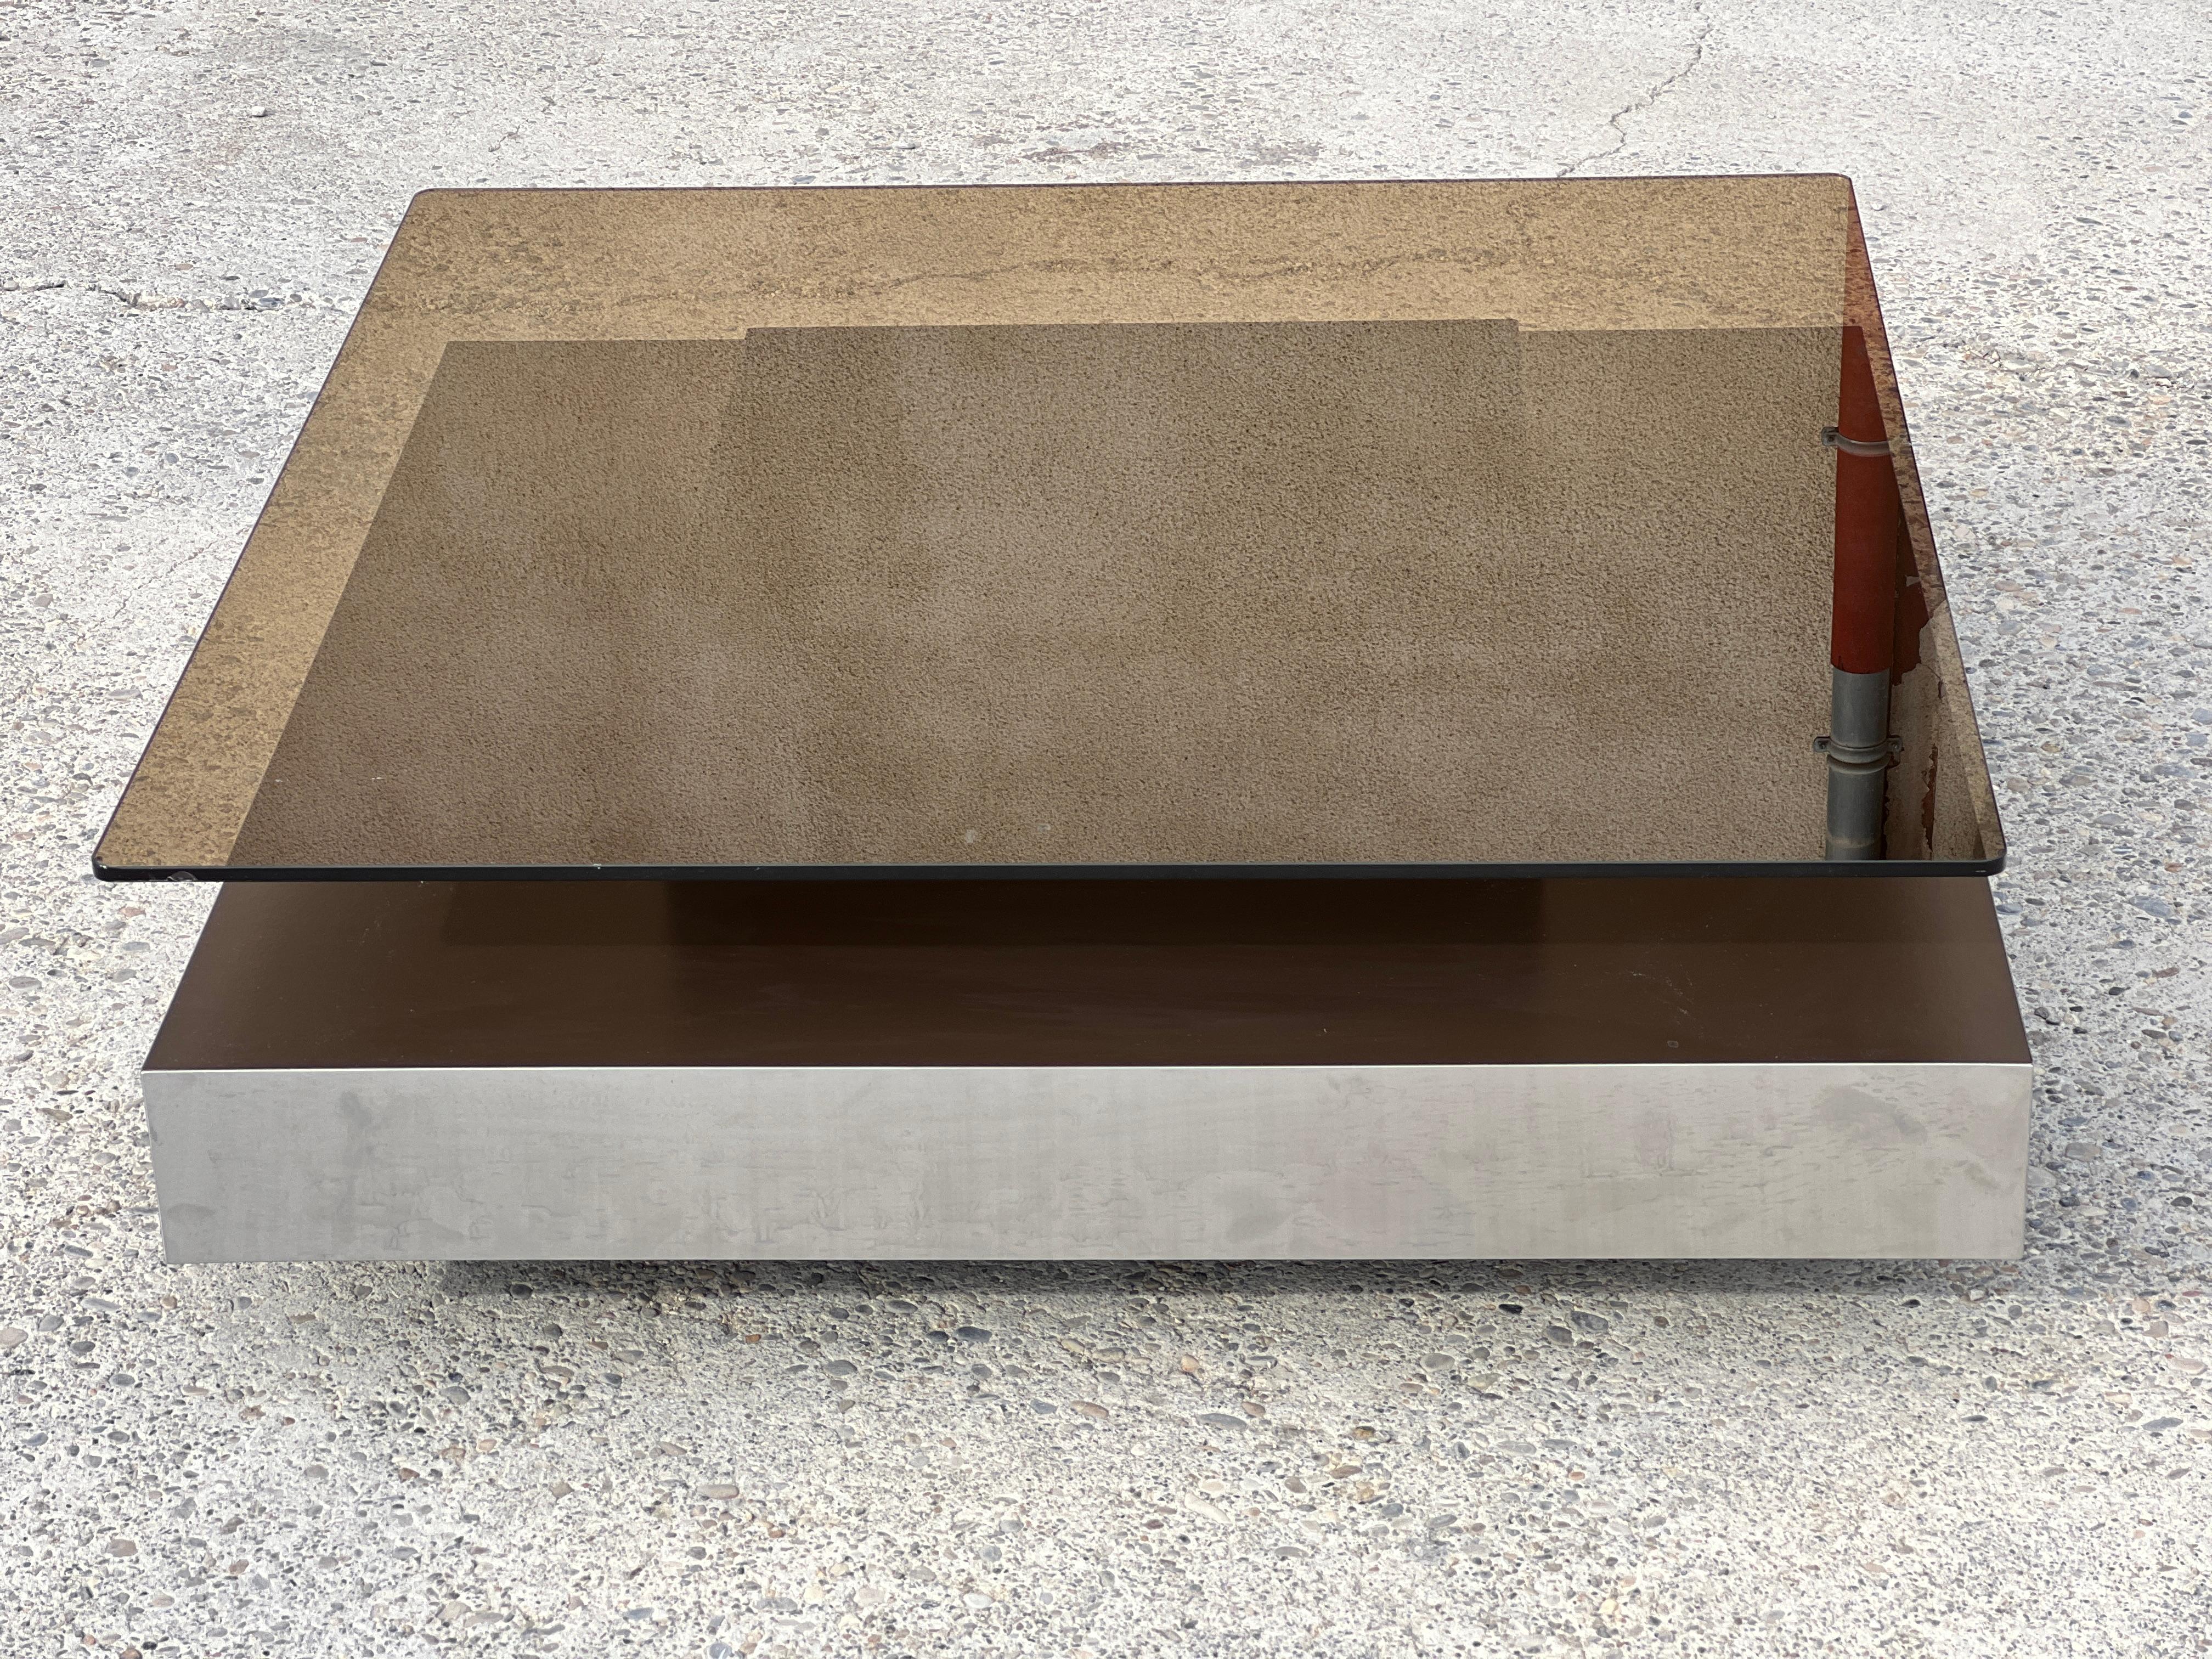 Roche Bobois Coffee Table 1970 in the Style of Willy Rizzo 1